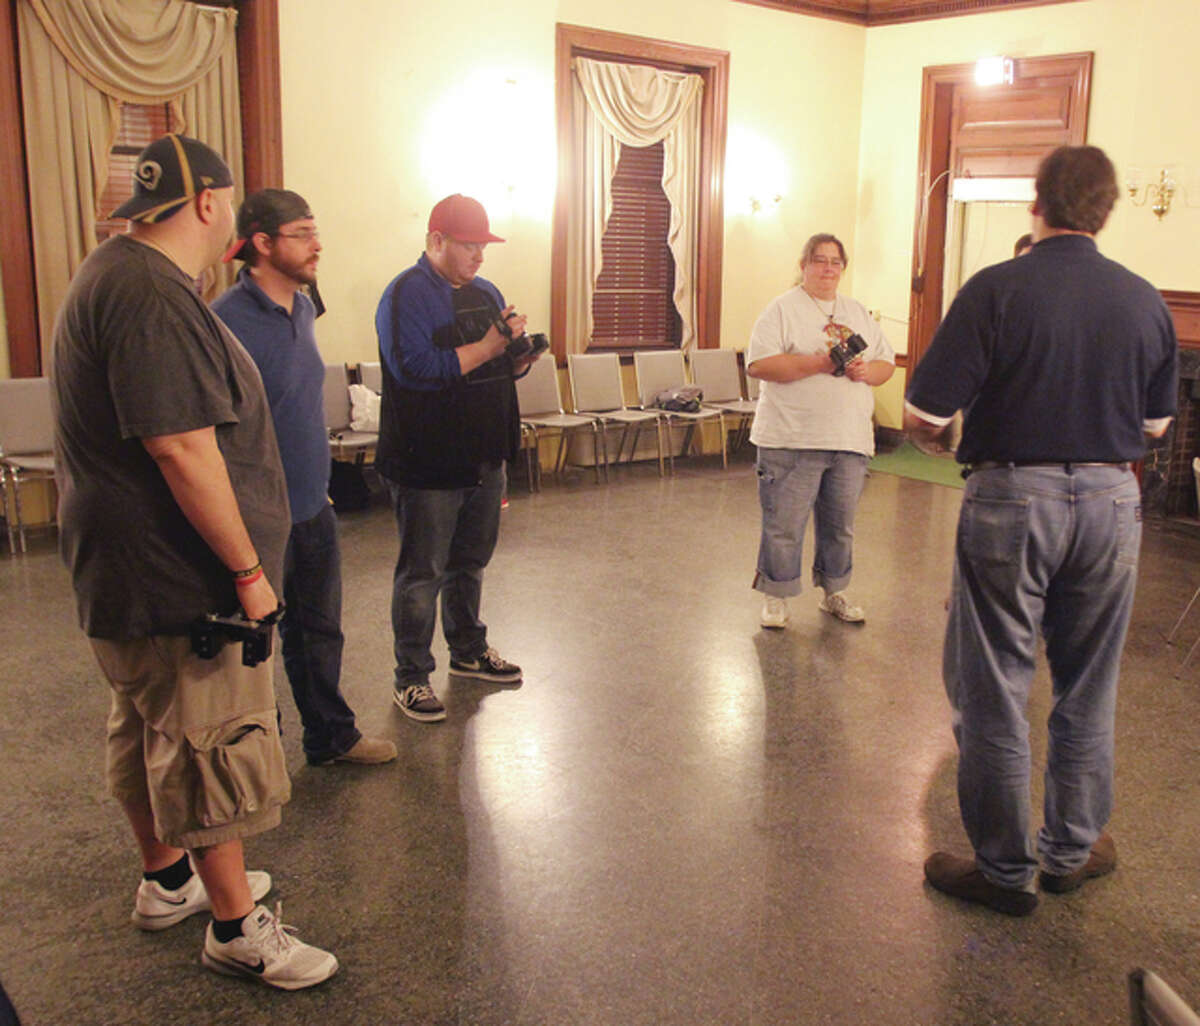 Mark Farley, far right, founder and owner of the St. Louis Paranormal Research Society, shows participants how to use equipment during a haunted tour of the Alton YWCA. Alton has a reputation for hauntings, and Farley said the YWCA is one of the more active spots.